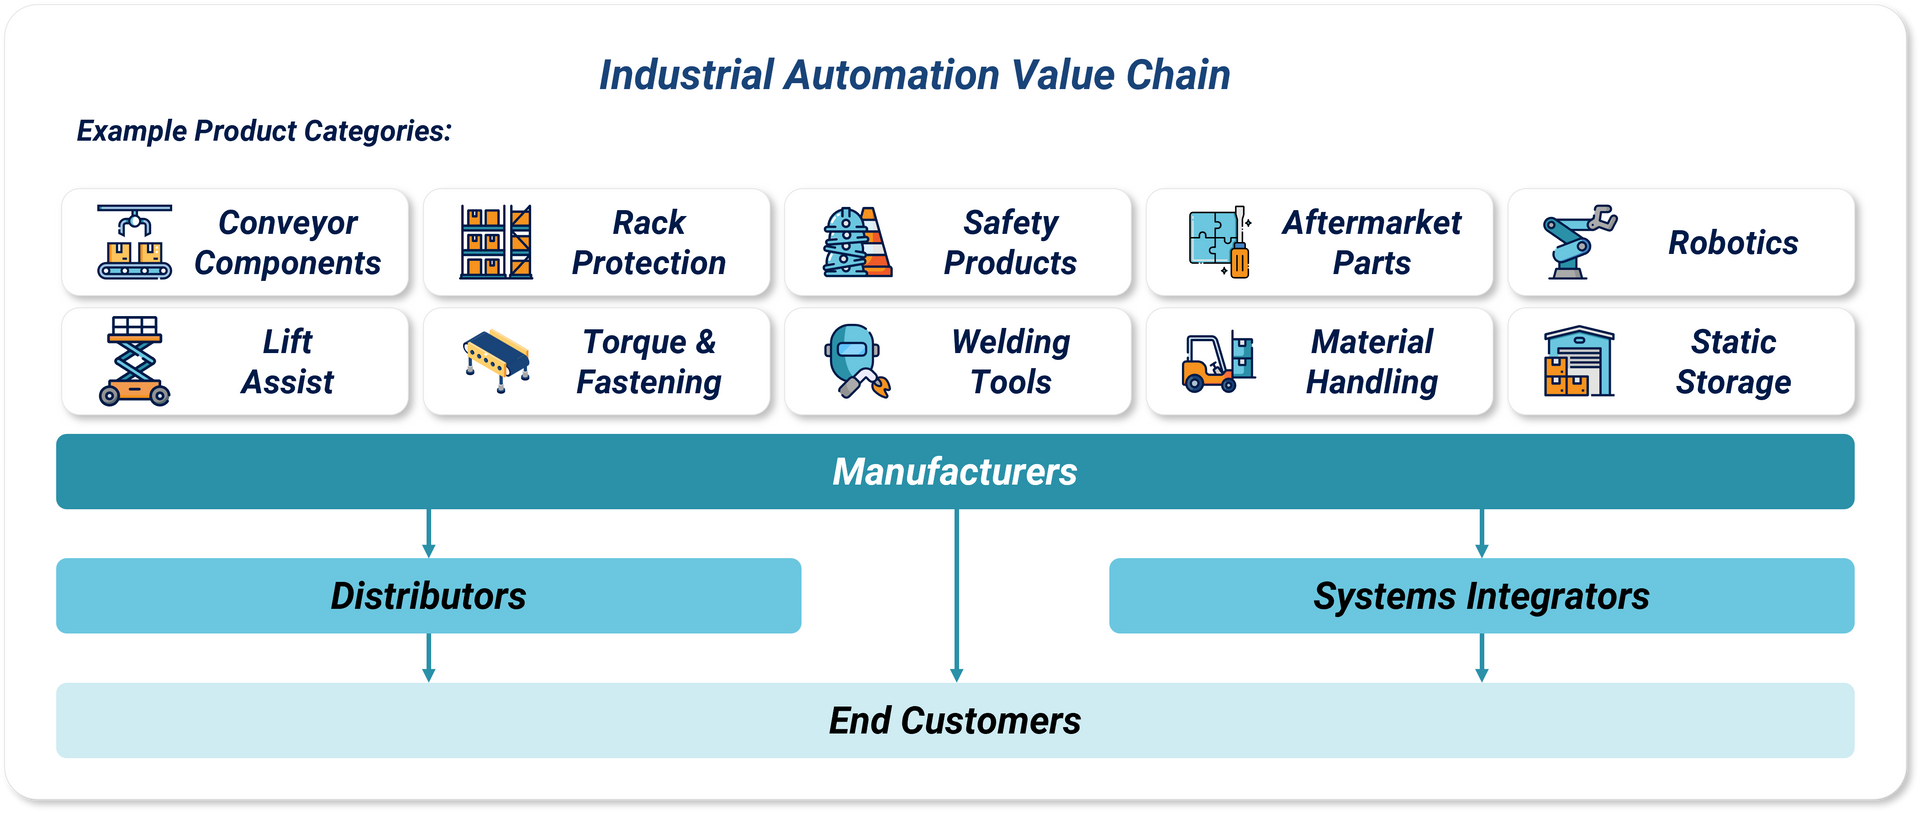 The industrial automation value chain: Example product categories would include conveyer components, rock protection, safety products, aftermarket products, robotics, life assist, torque and fastening, welding tools, material handling & static storage